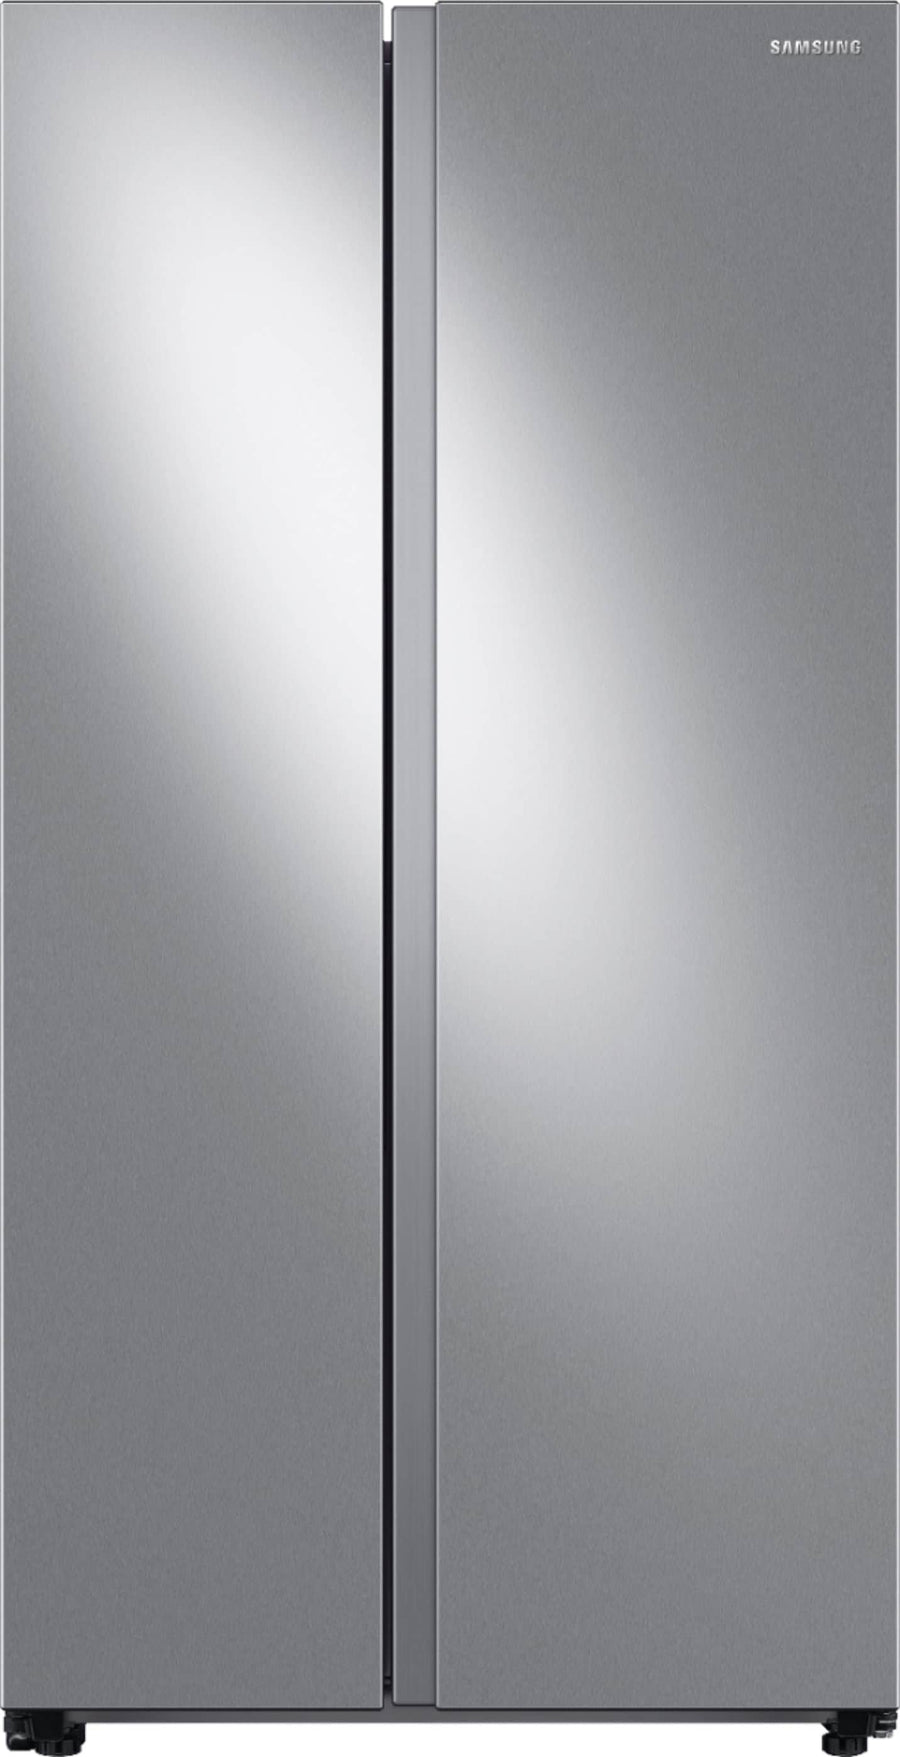 Samsung - 23 cu. ft. Counter Depth Side-by-Side Refrigerator with WiFi and All-Around Cooling - Stainless steel_0